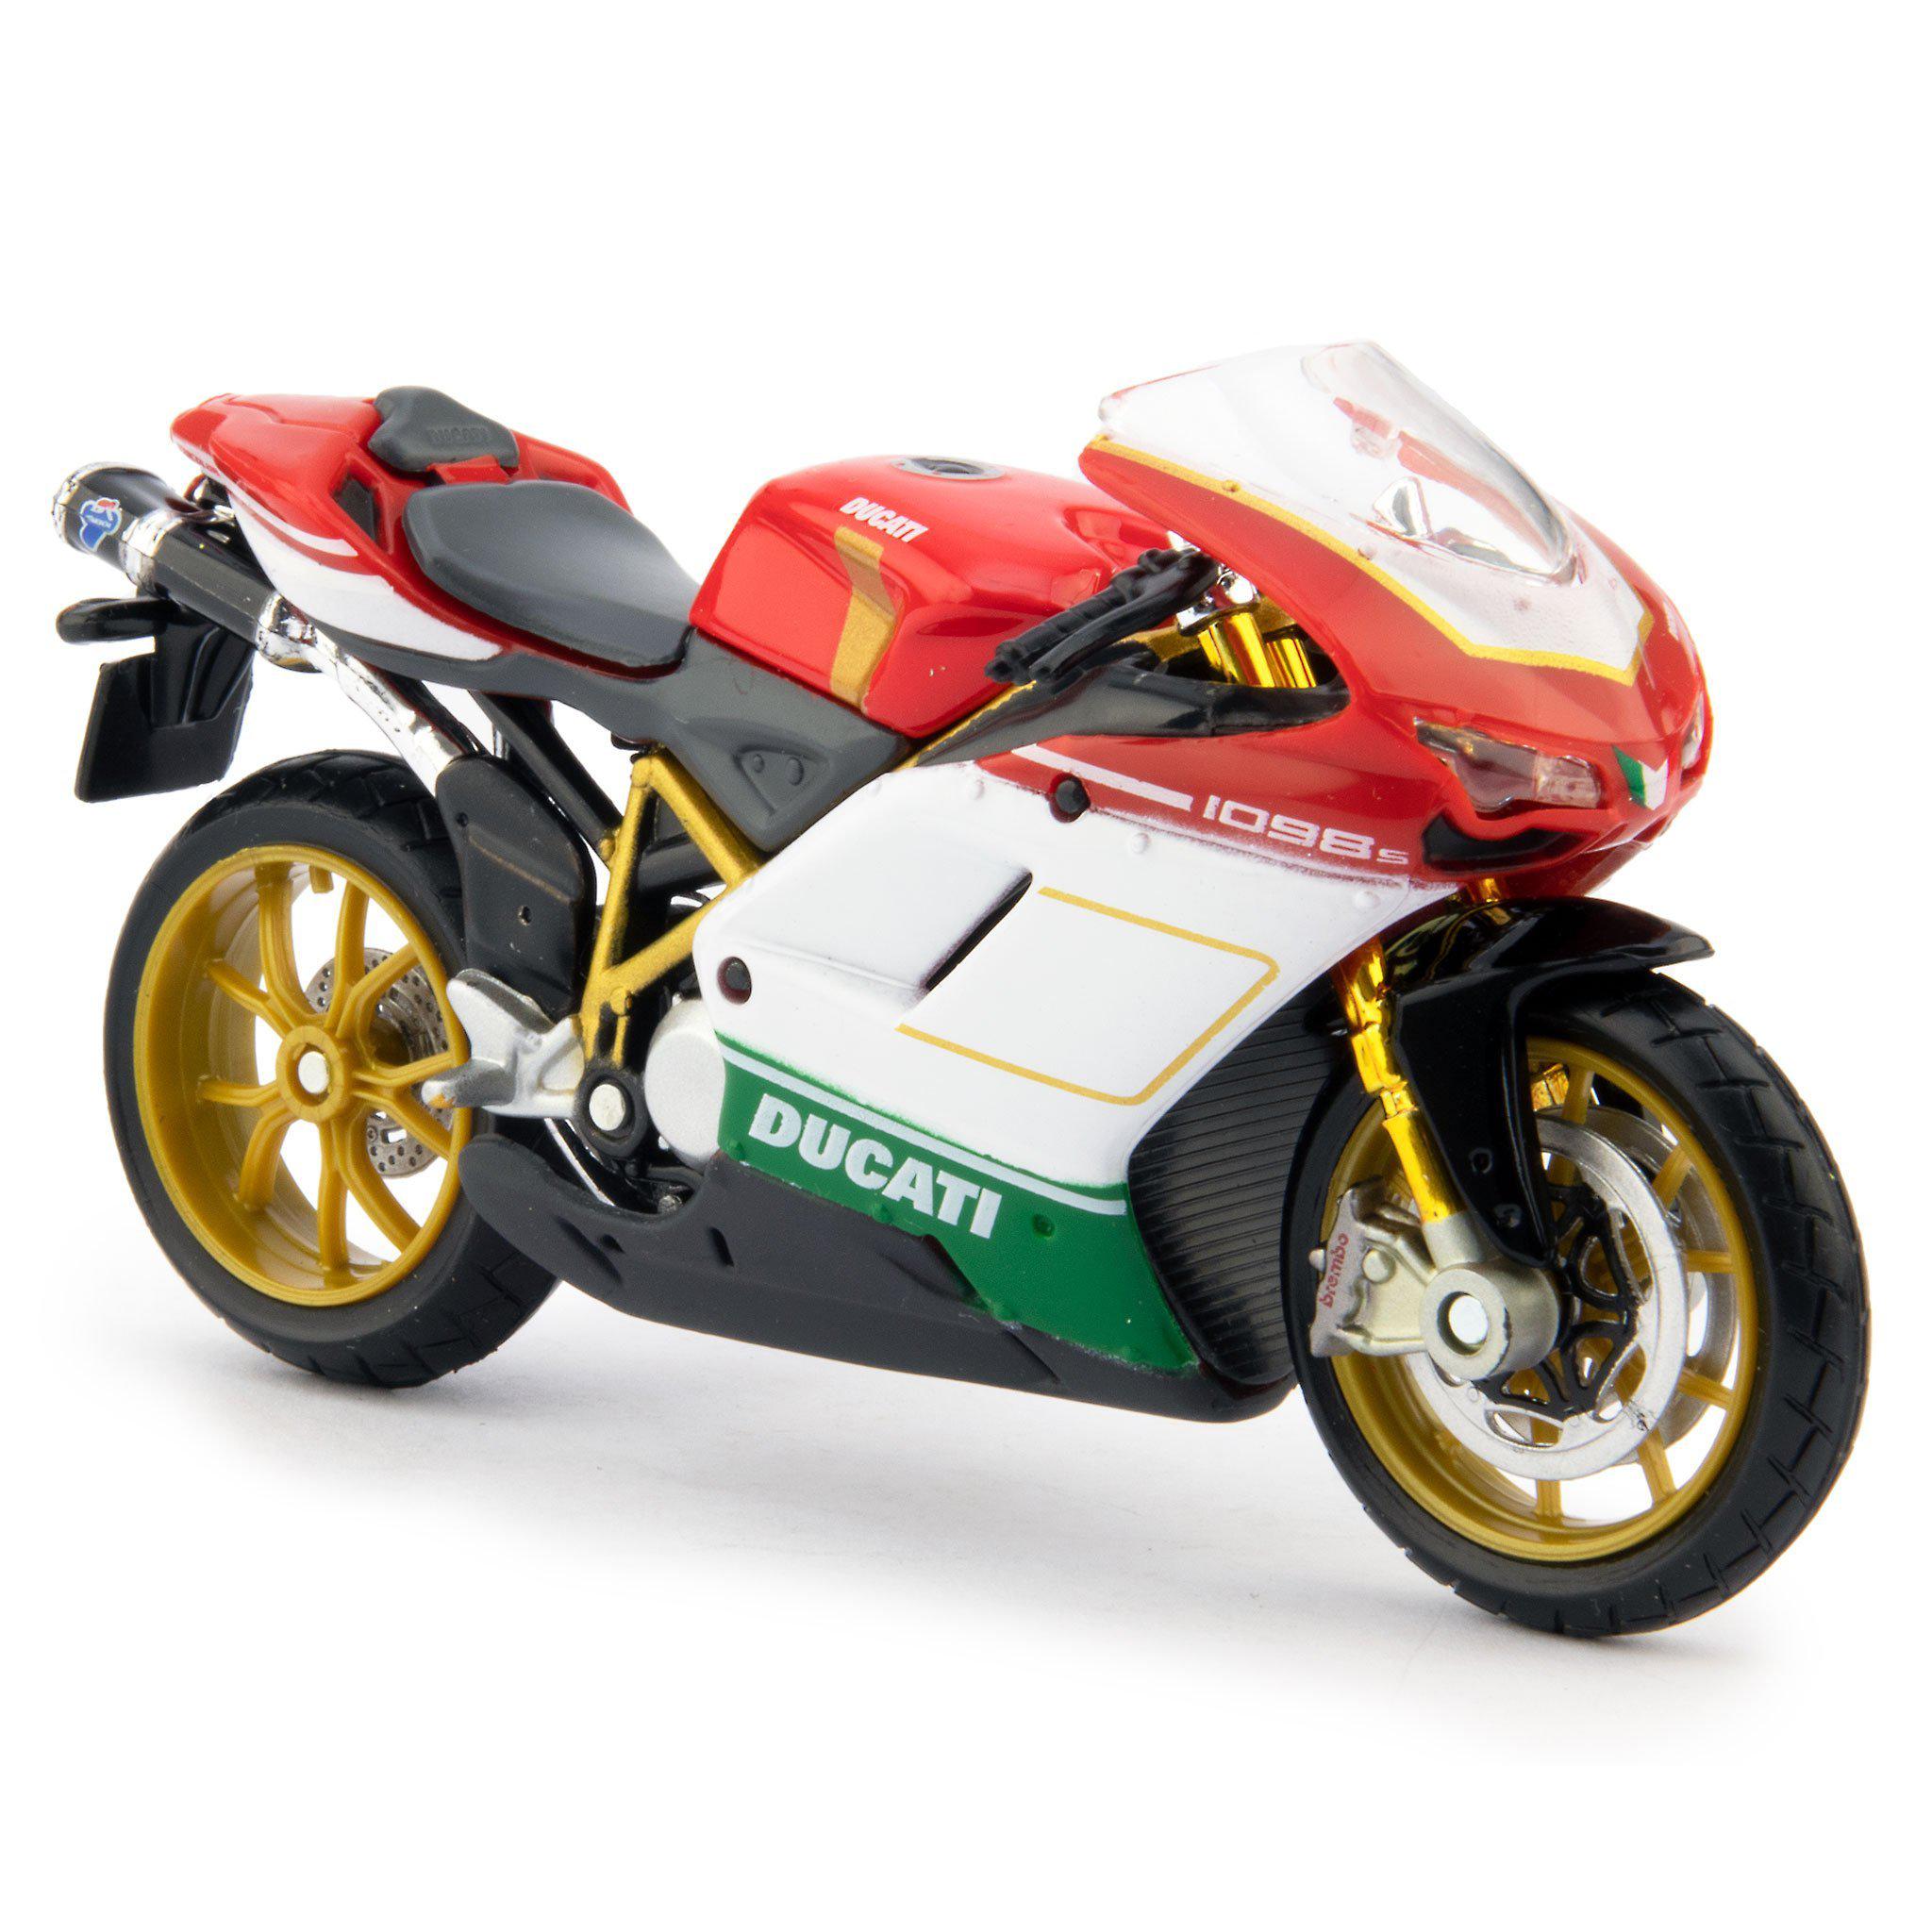 Ducati 1098 S Diecast Model Motorcycle red/white/green - 1:18 scale-Maisto-Diecast Model Centre